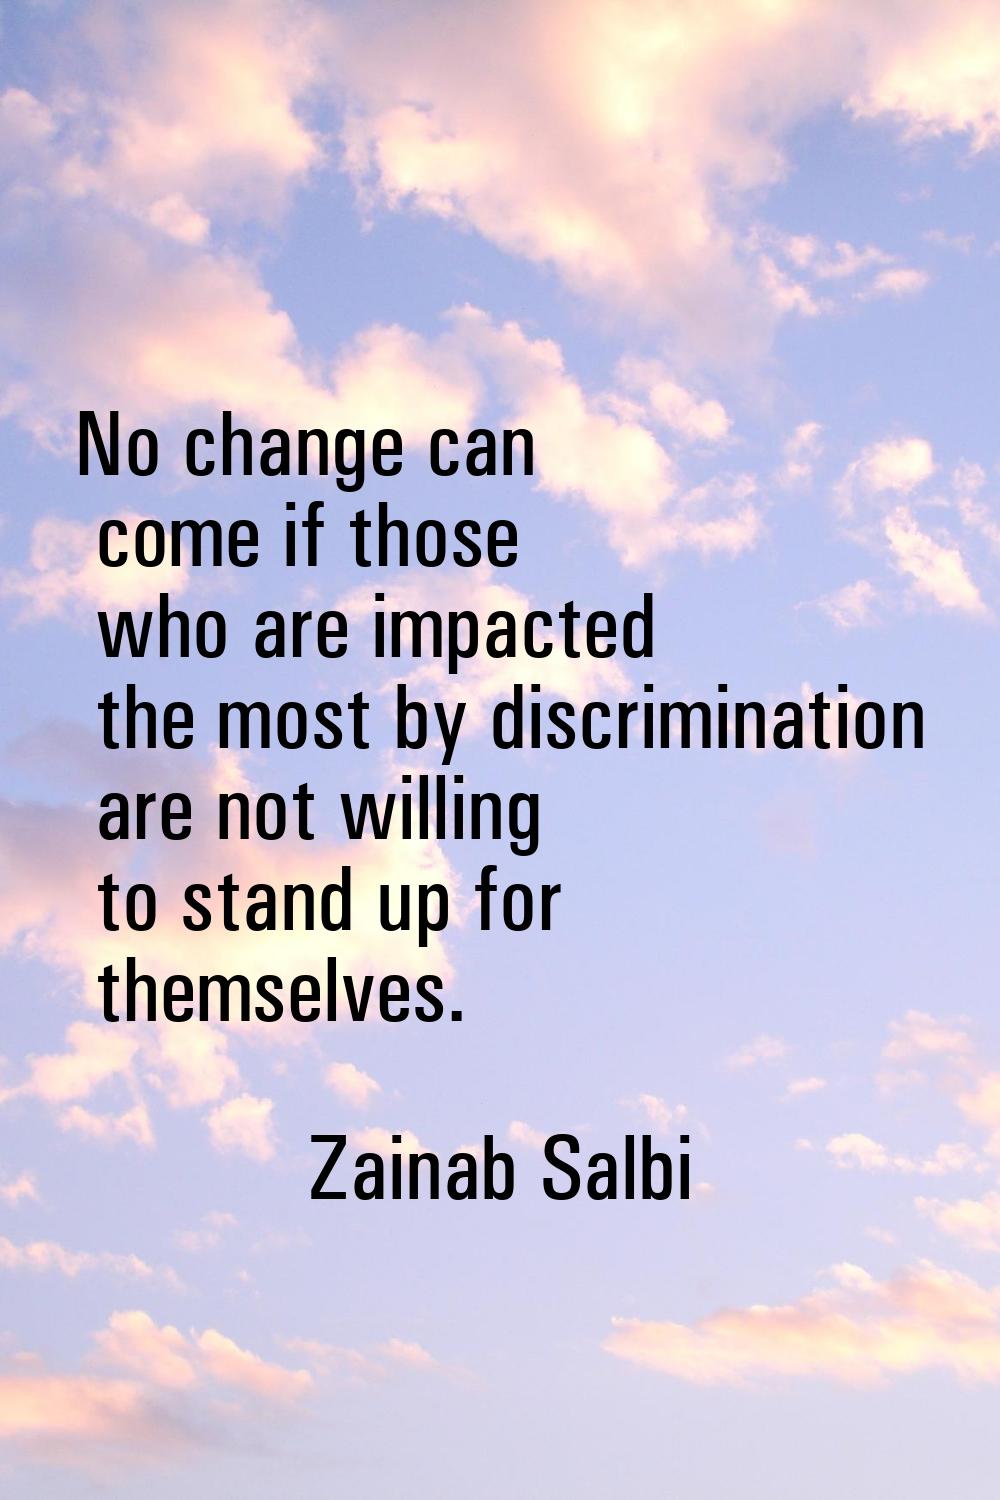 No change can come if those who are impacted the most by discrimination are not willing to stand up